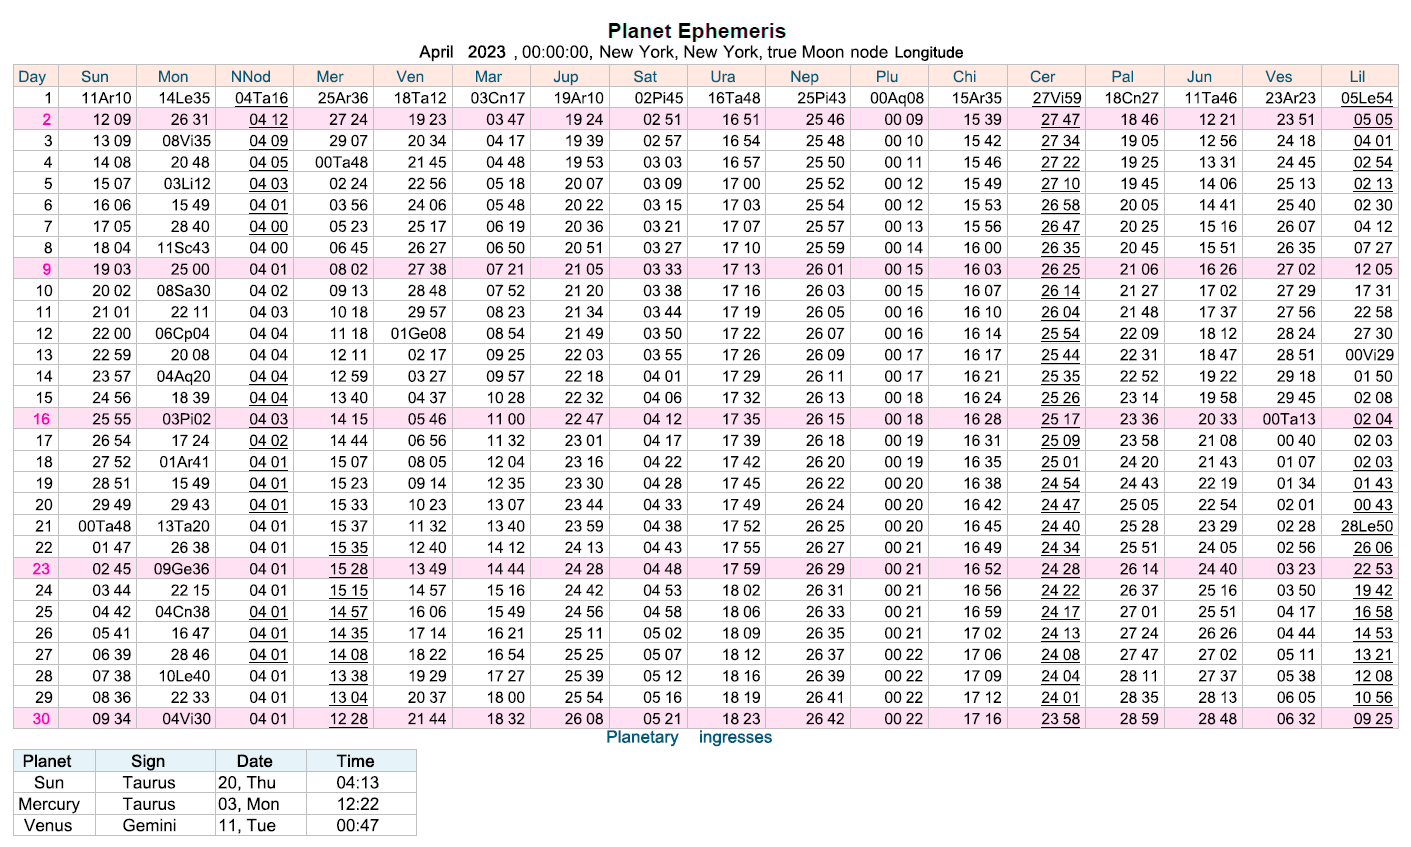 ephemeris listing daily positions of the planets in the month of April 2023